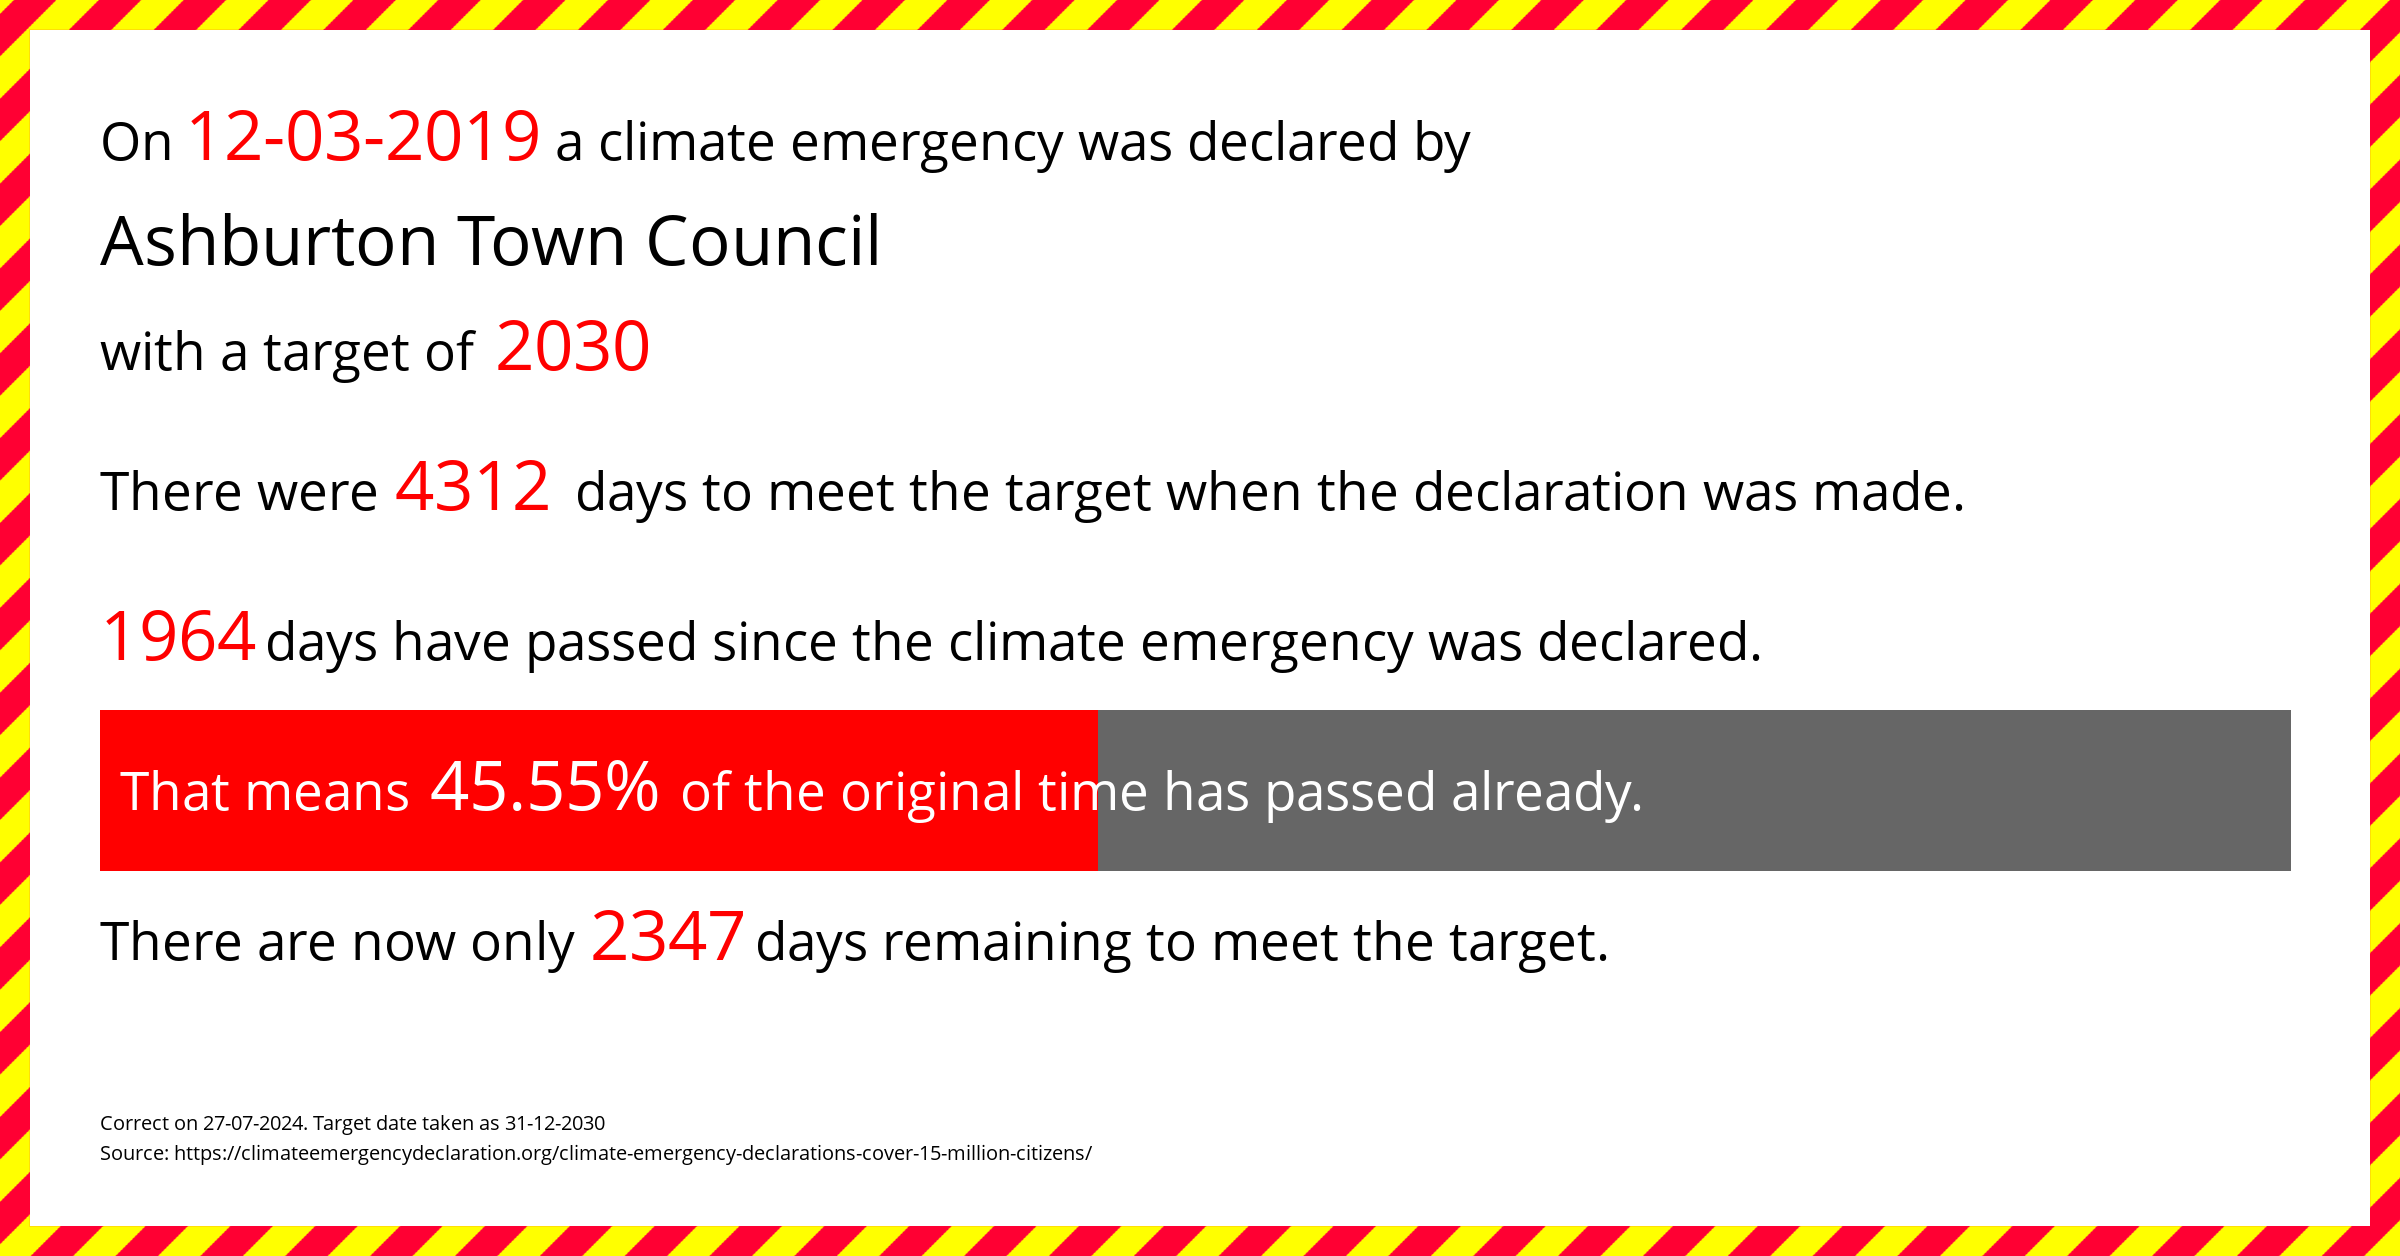 Ashburton Town Council declared a Climate emergency on Tuesday 12th March 2019, with a target of 2030.